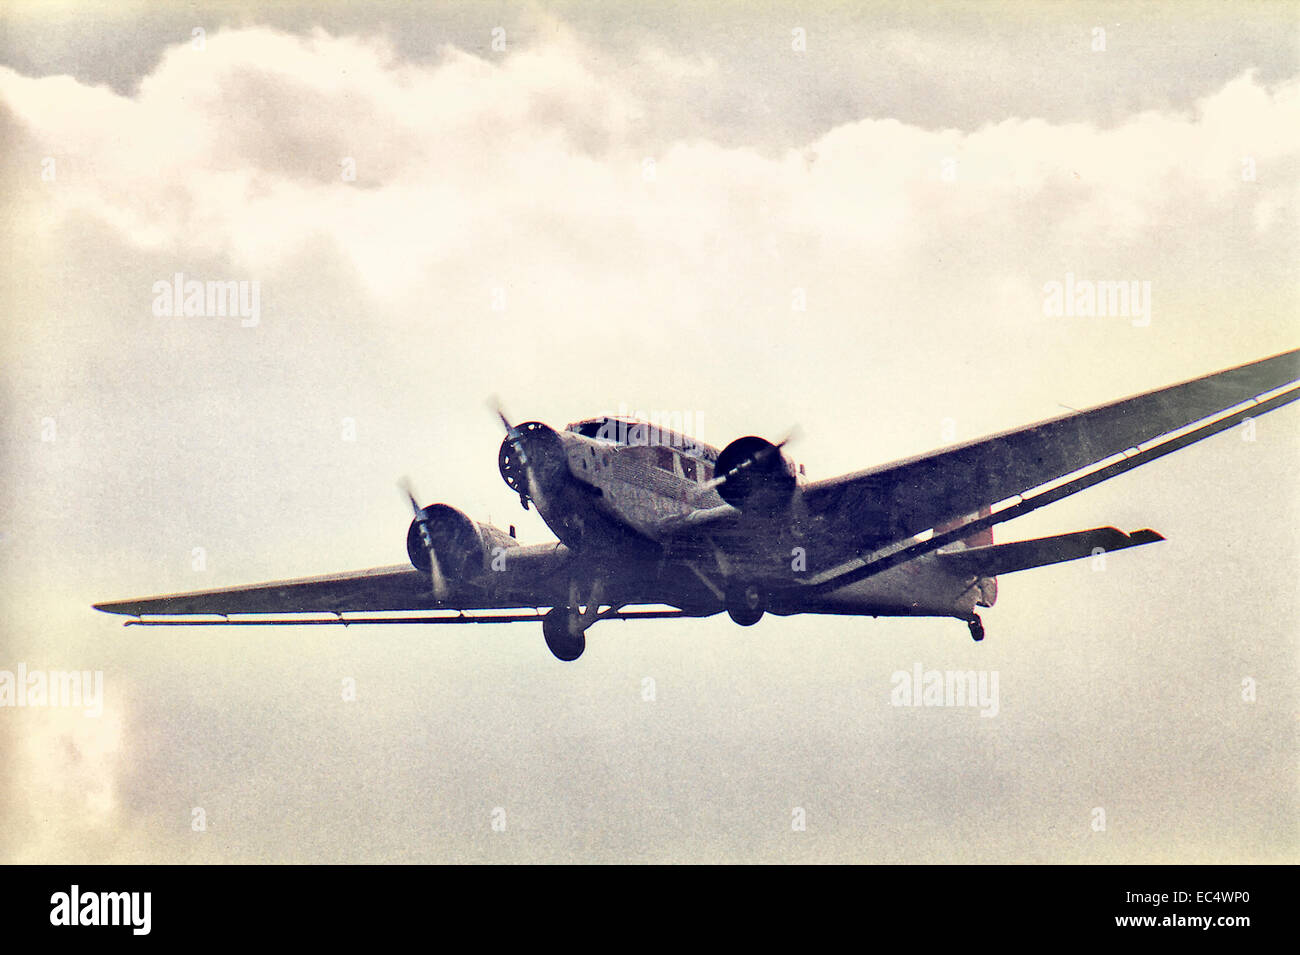 Ju 52 piano elica fly-over Foto Stock